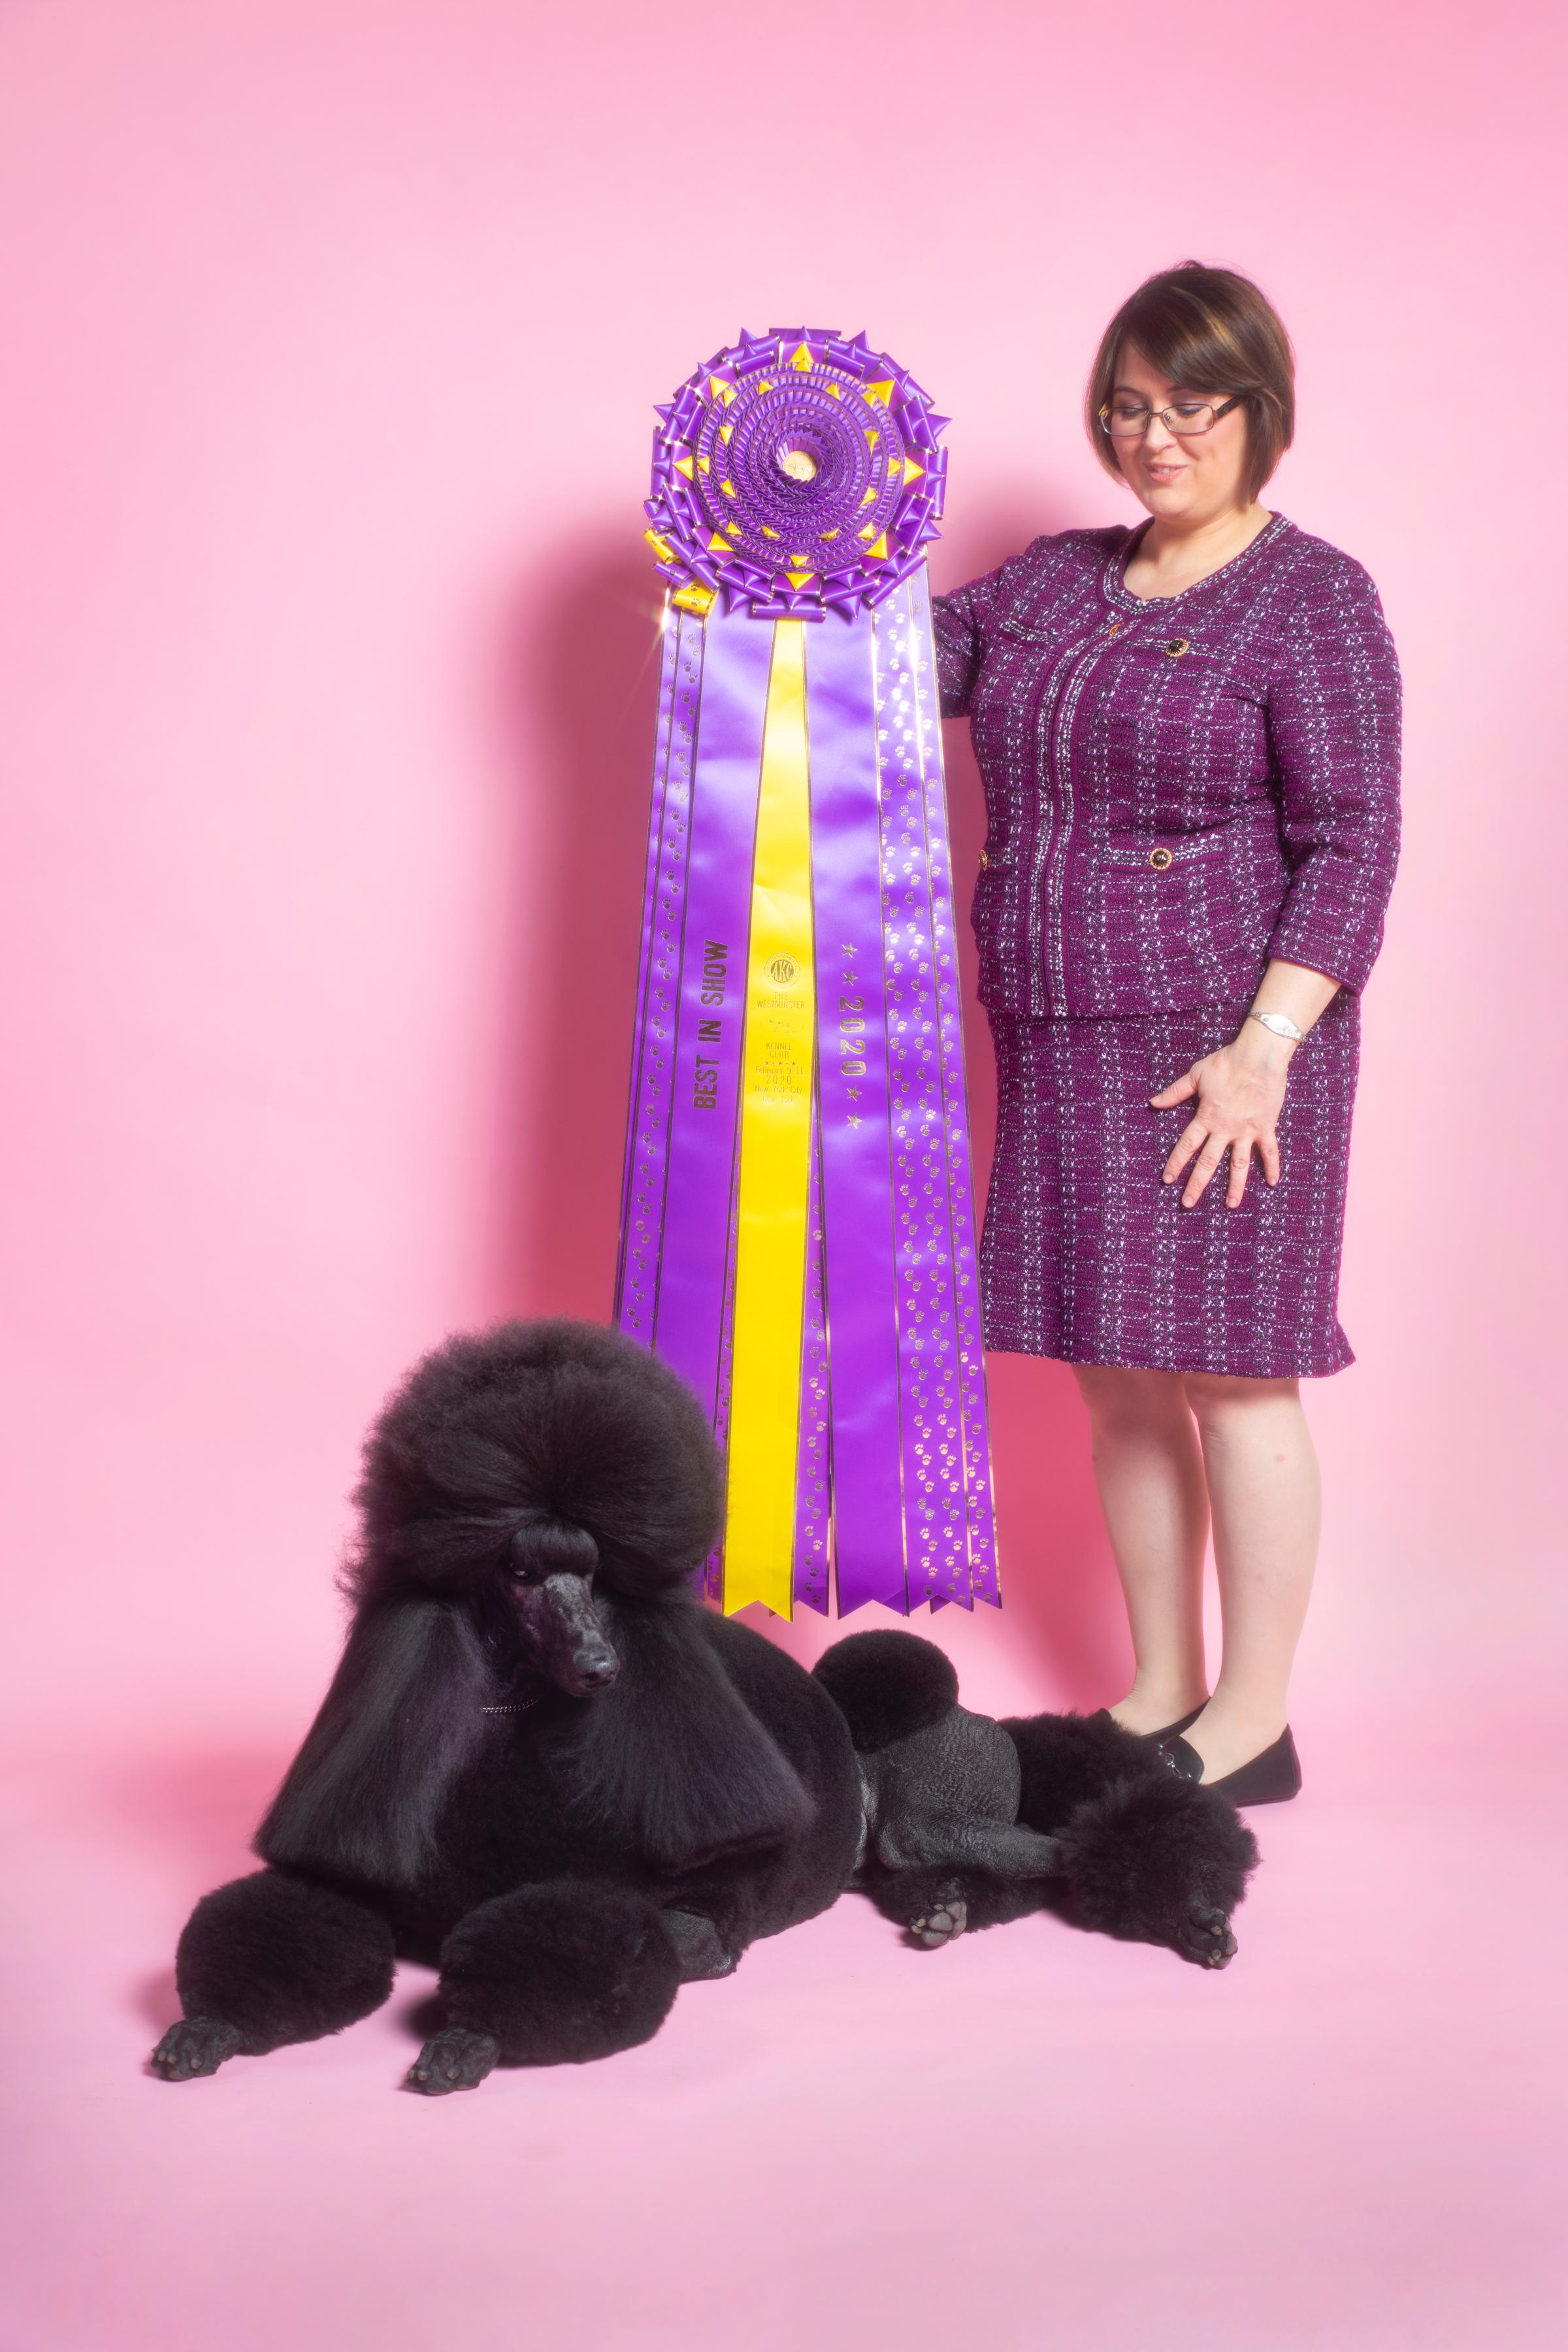 Siba the Standard Poodle poses at the TIME studio on Feb. 12. She won the Westminster Dog Show the day prior.